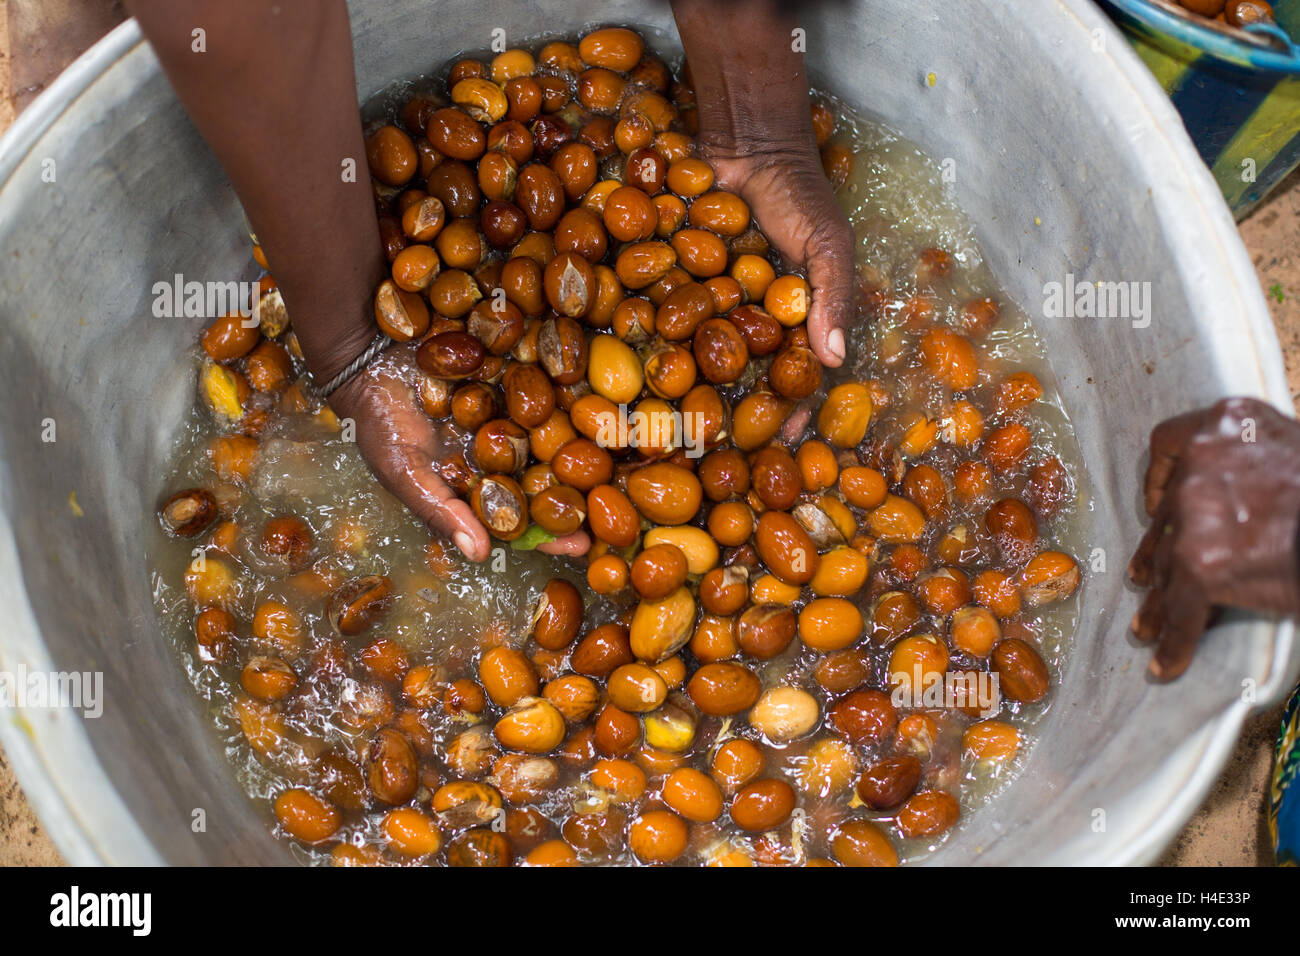 Shea nuts are washed after the fruit is removed as part of the shea butter making process in rural Réo, Burkina Faso. Stock Photo